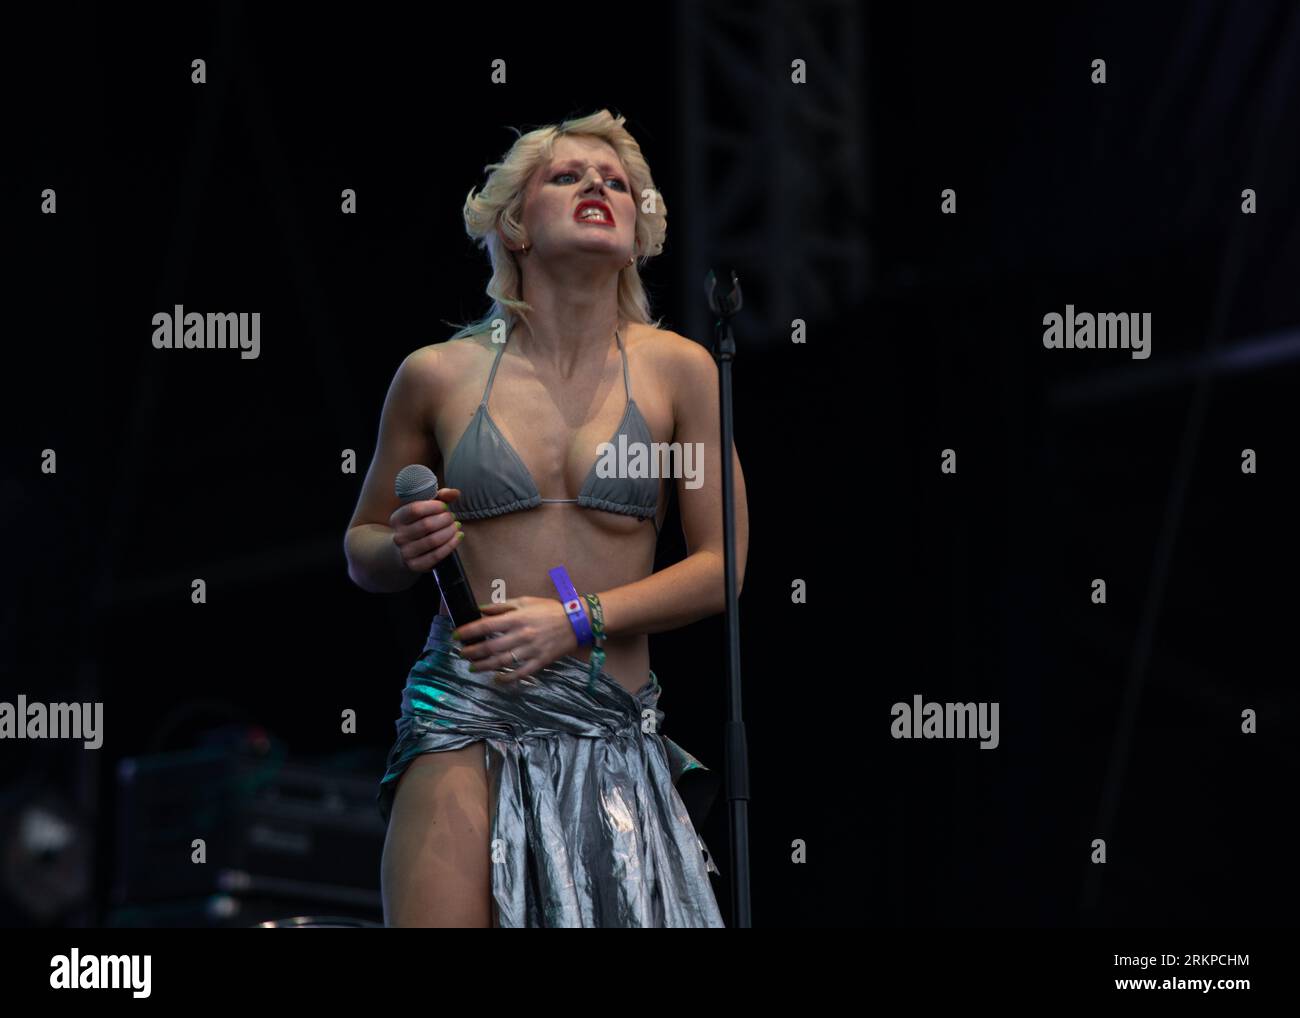 London, United Kingdom. 25th August 2023. Amyl and the Sniffers perform at All Points Festival in East London. Cristina Massei/Alamy Live News Stock Photo